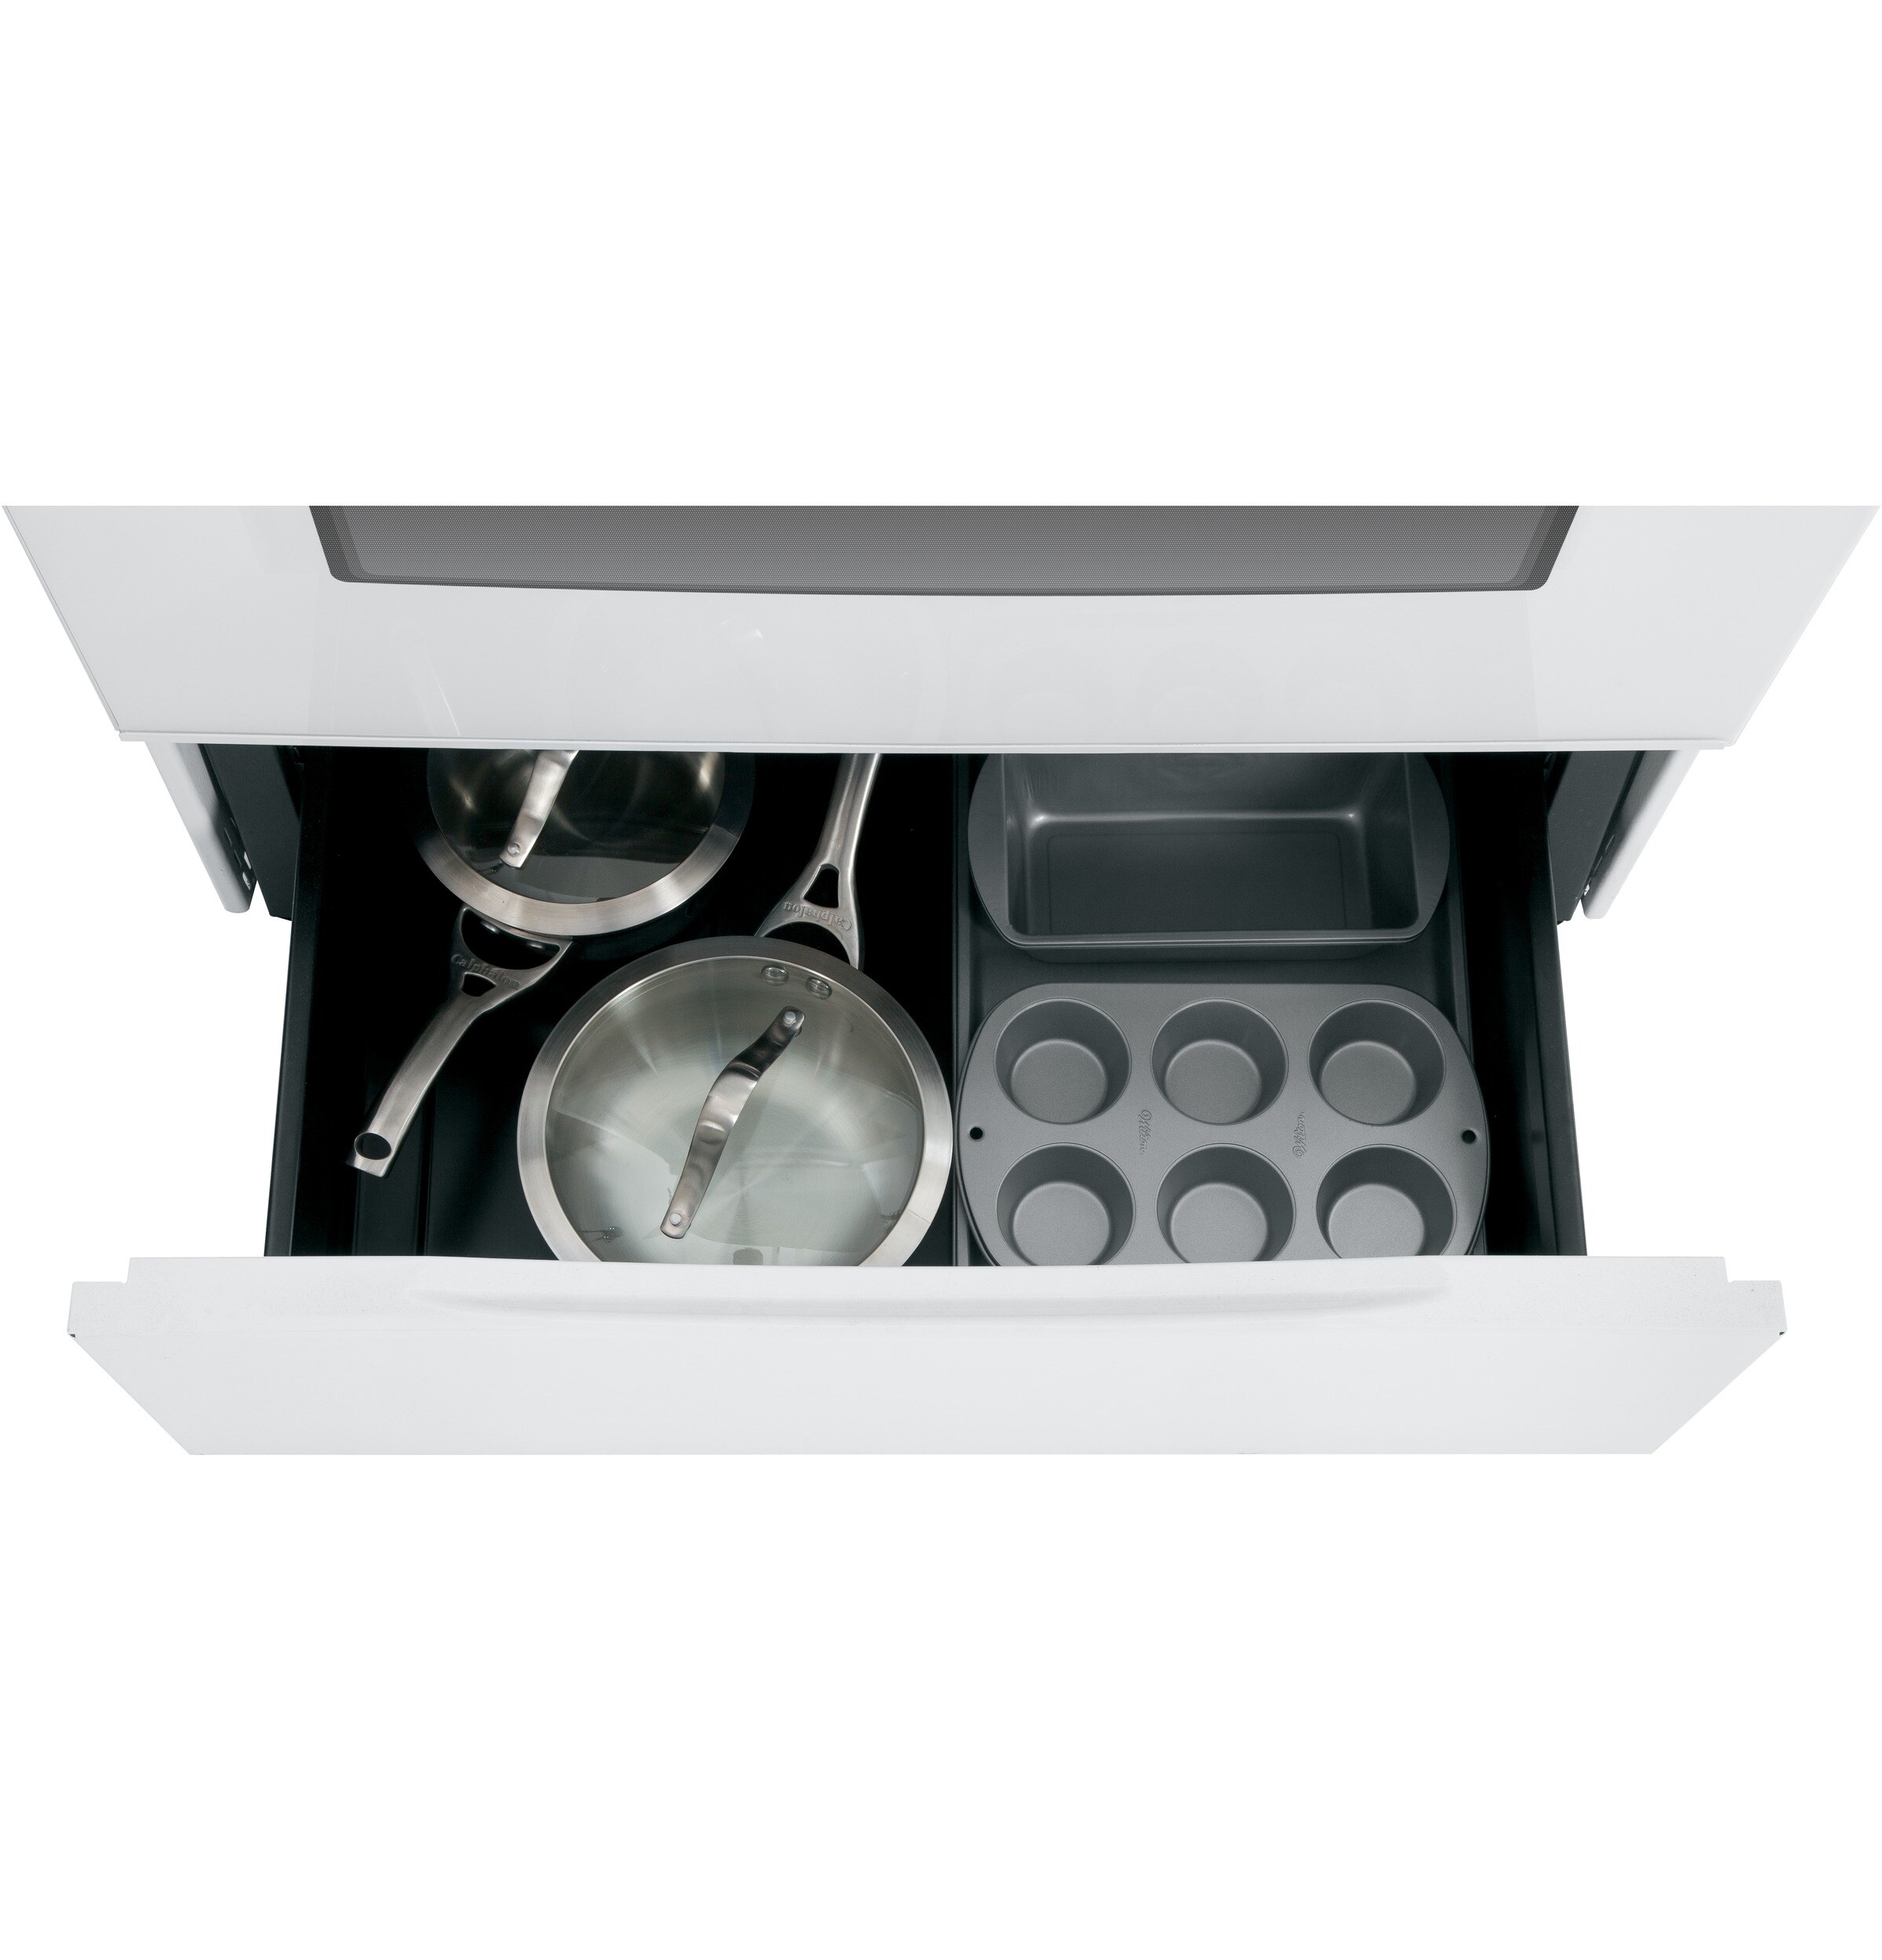 JB735EPES by GE Appliances - GE® 30 Free-Standing Electric